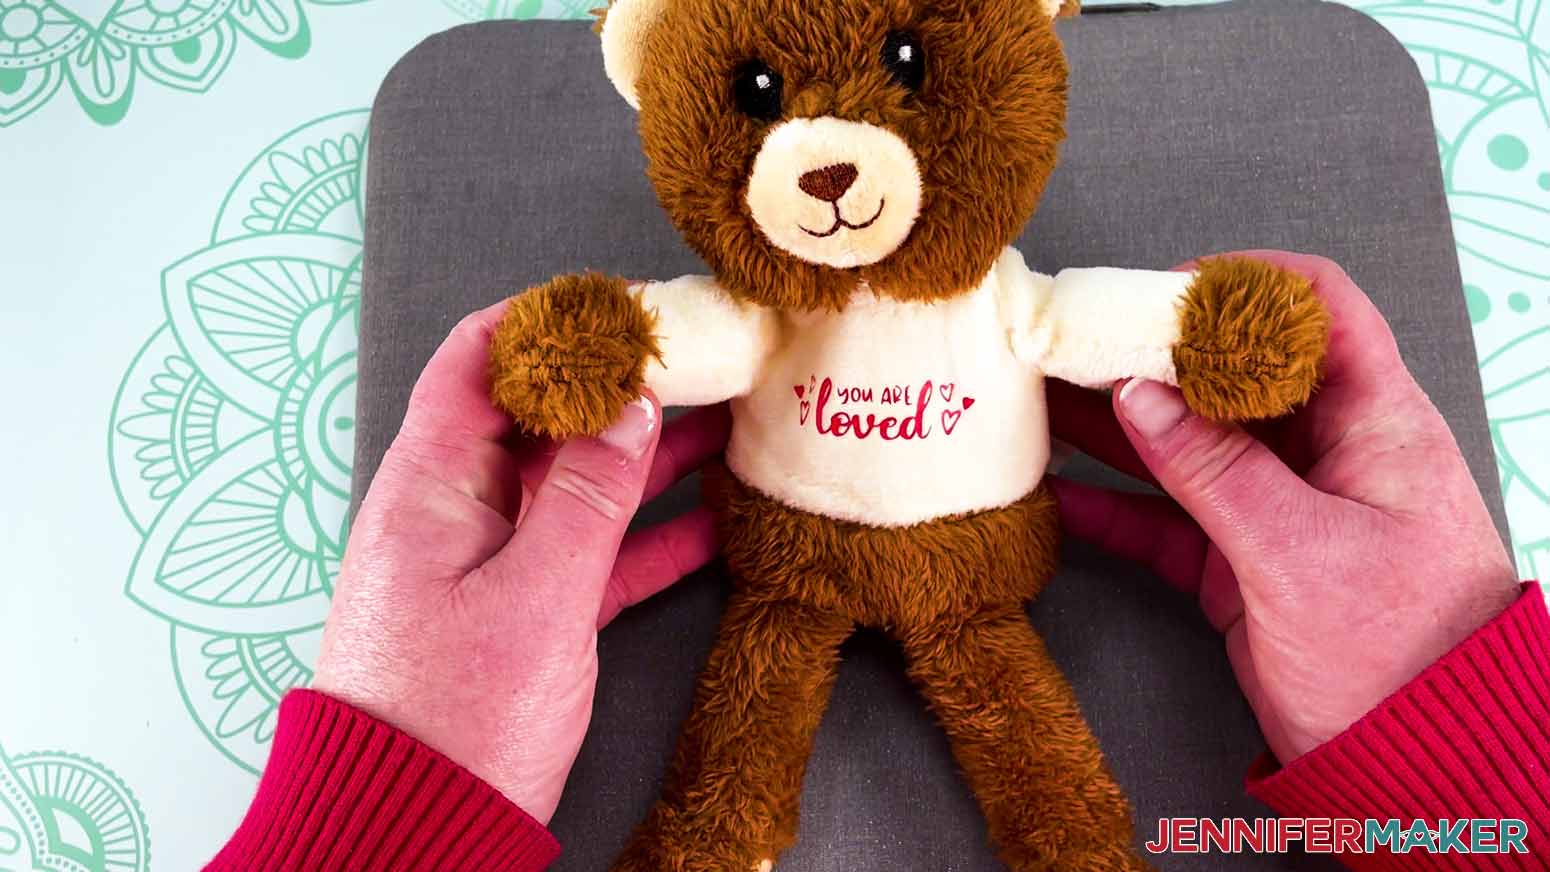 Dollar Tree Cricut Projects finished plush bear on display by crafter.